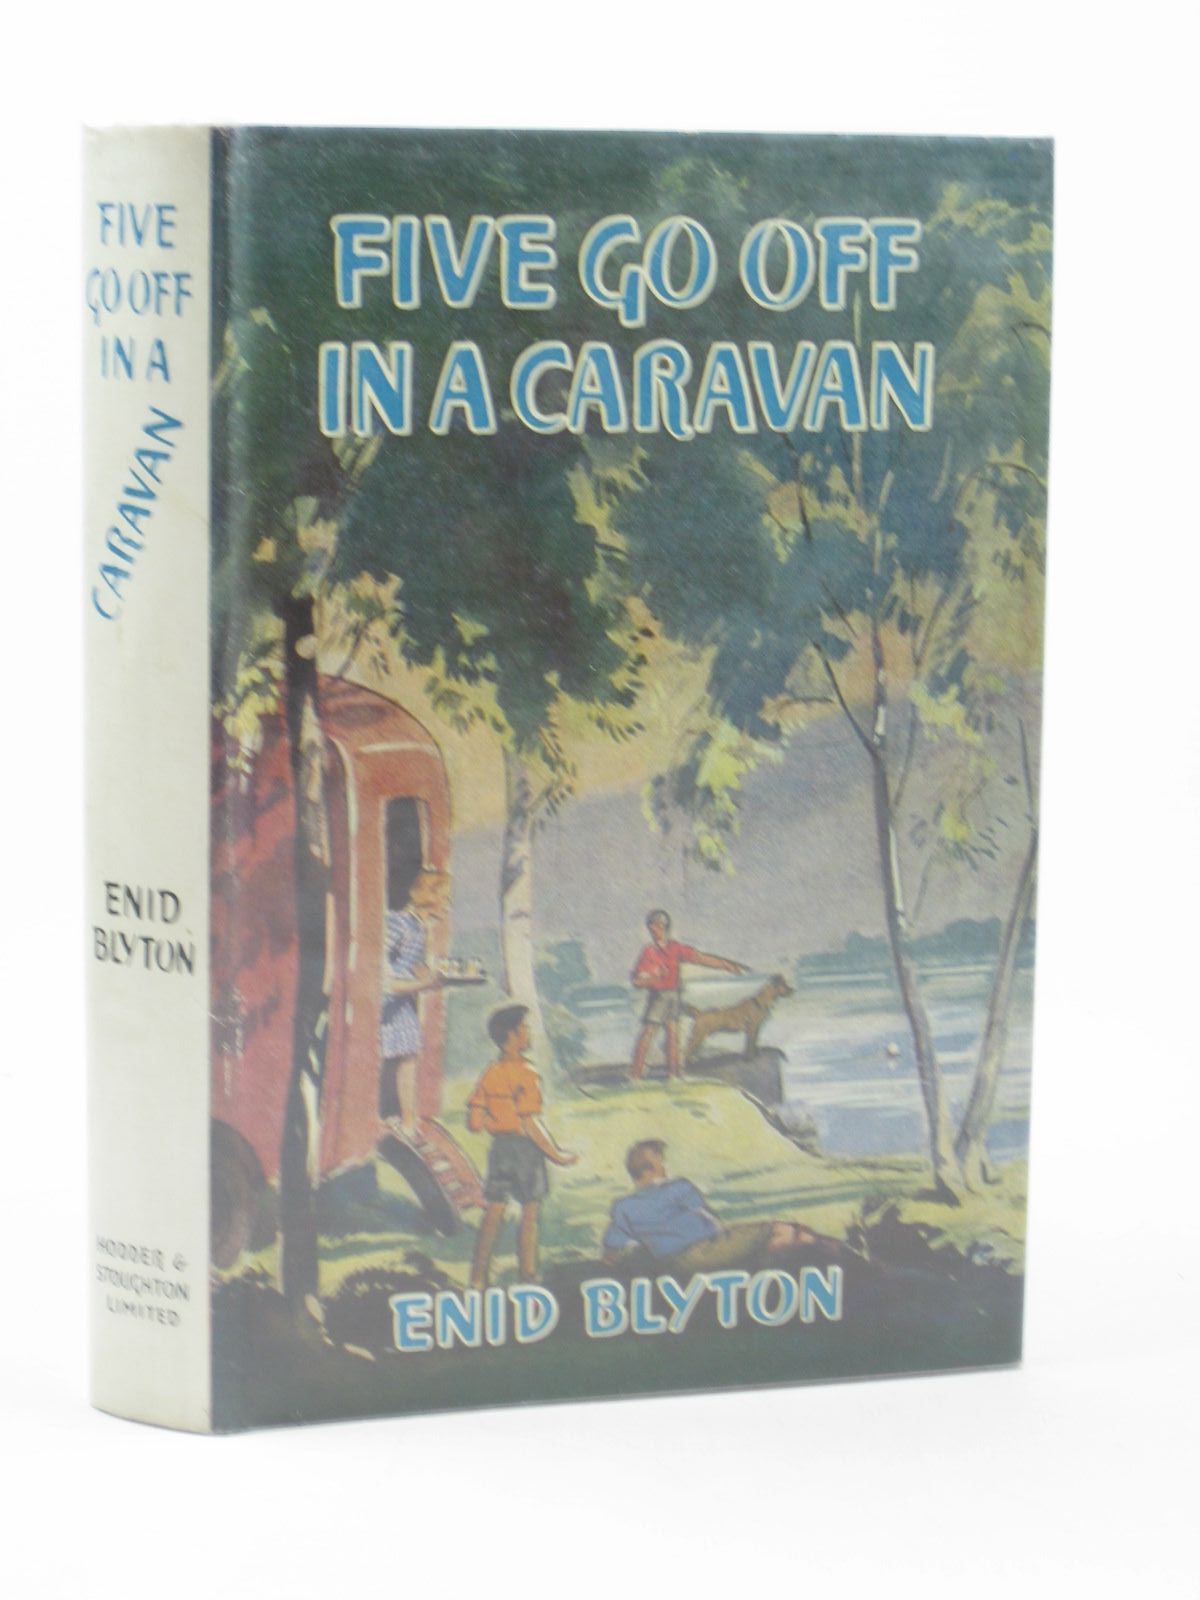 Cover of FIVE GO OFF IN A CARAVAN by Enid Blyton